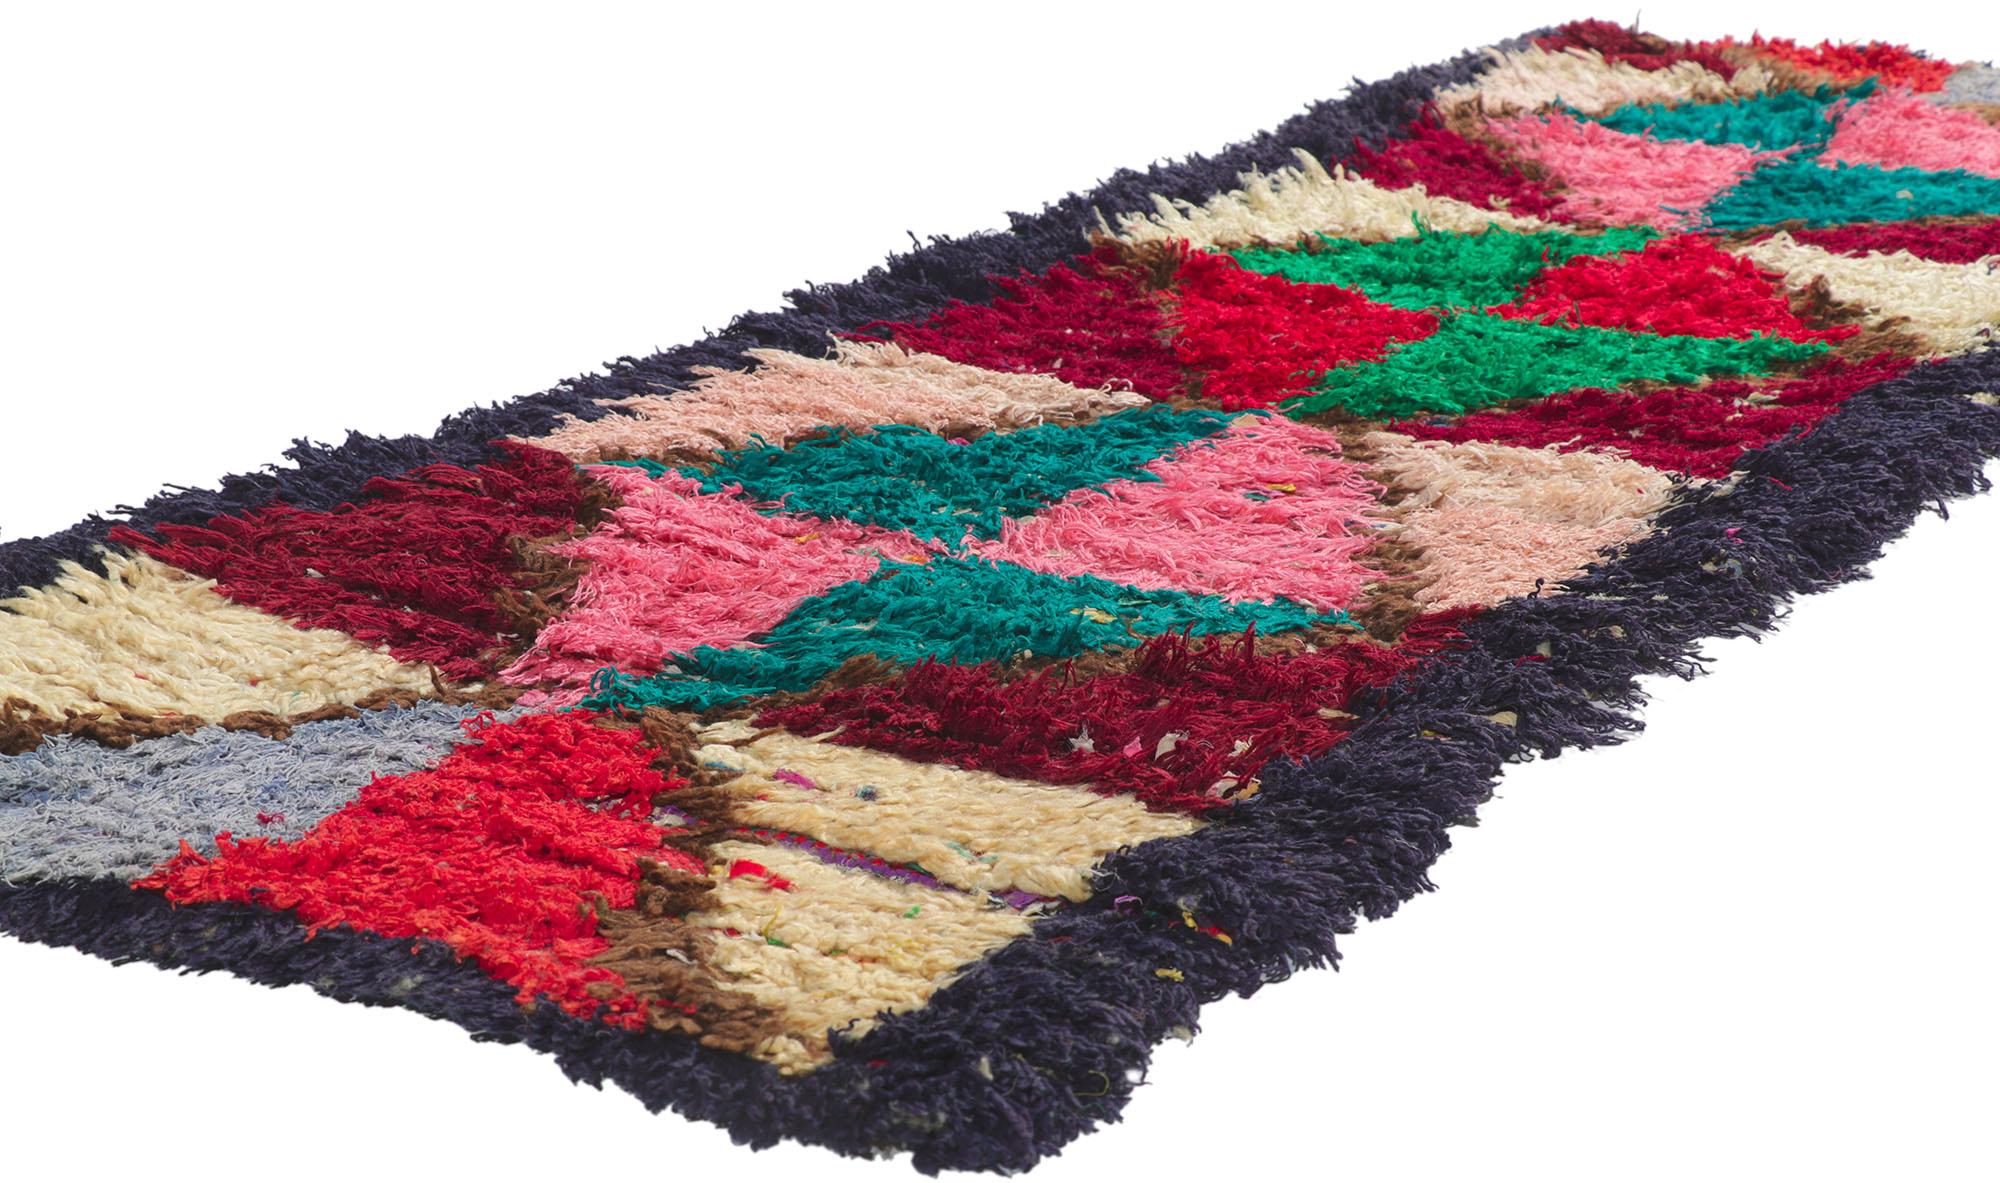 21630 vintage Berber Moroccan Boucherouite Rag rug 02'05 x 06'05. With its expressive tribal design, incredible detail and texture, this hand knotted vintage Berber Moroccan Boucherouite rug is a captivating vision of woven beauty. The abrashed